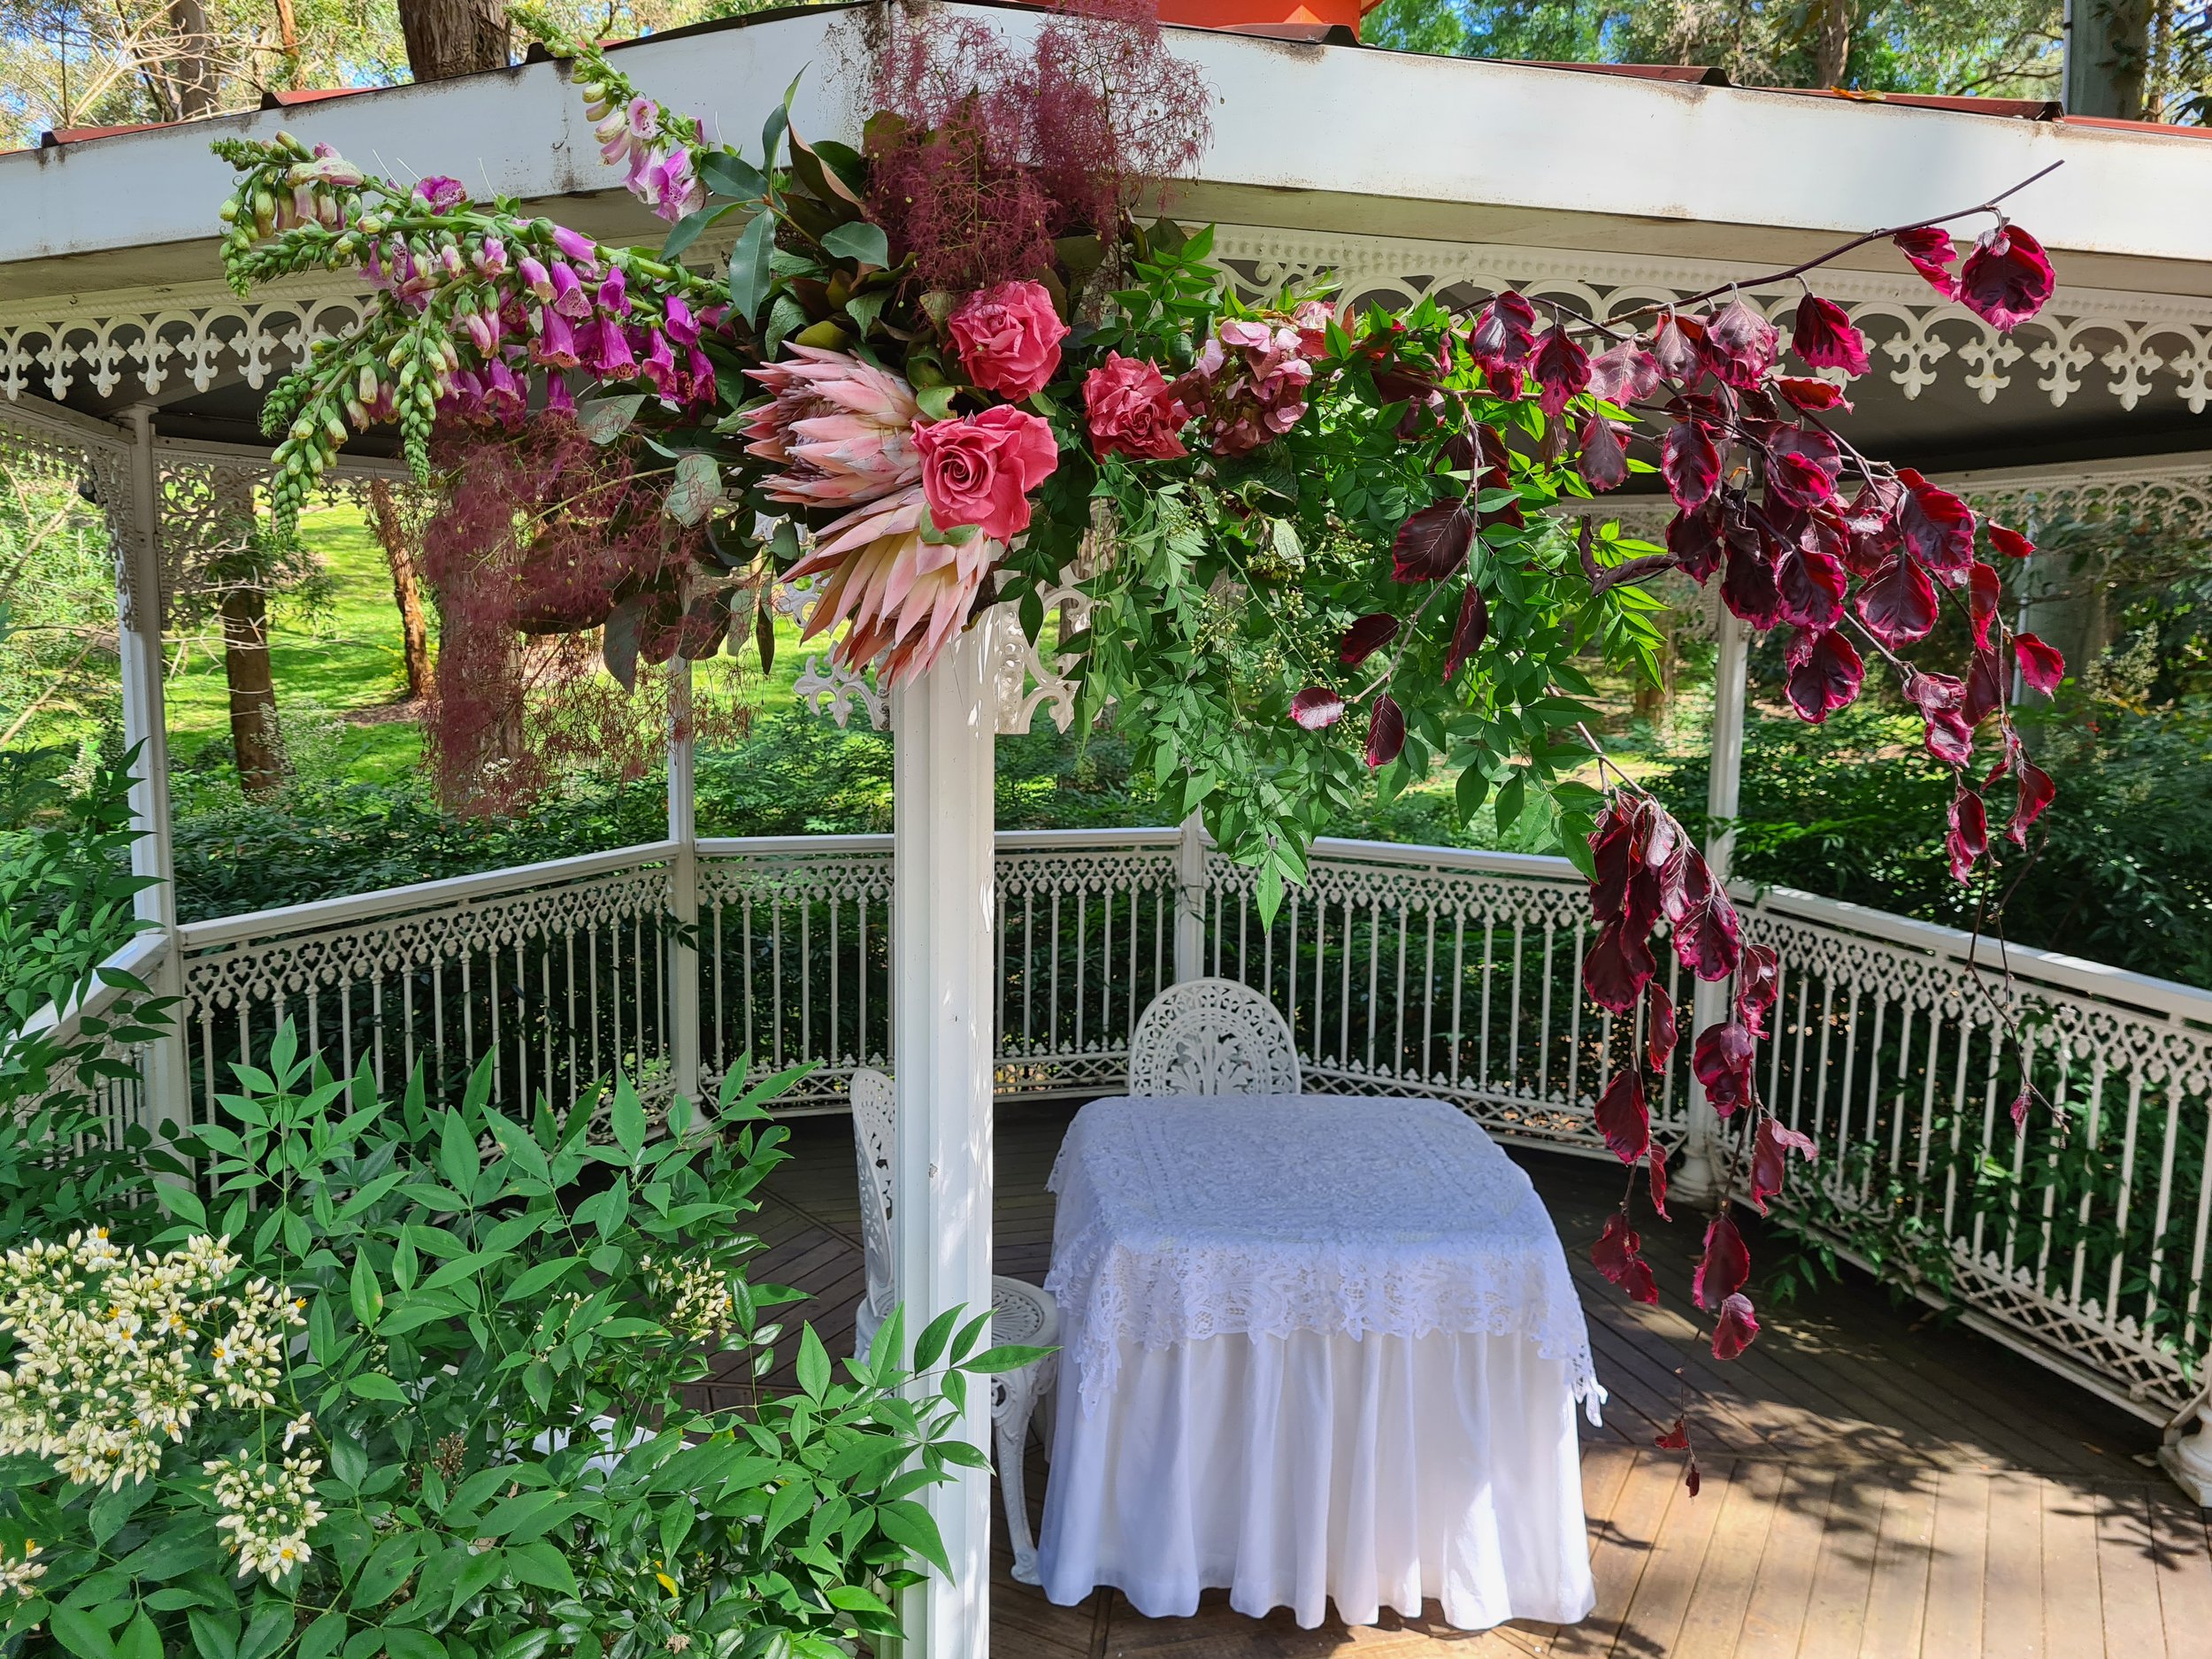 Gazebo and florals